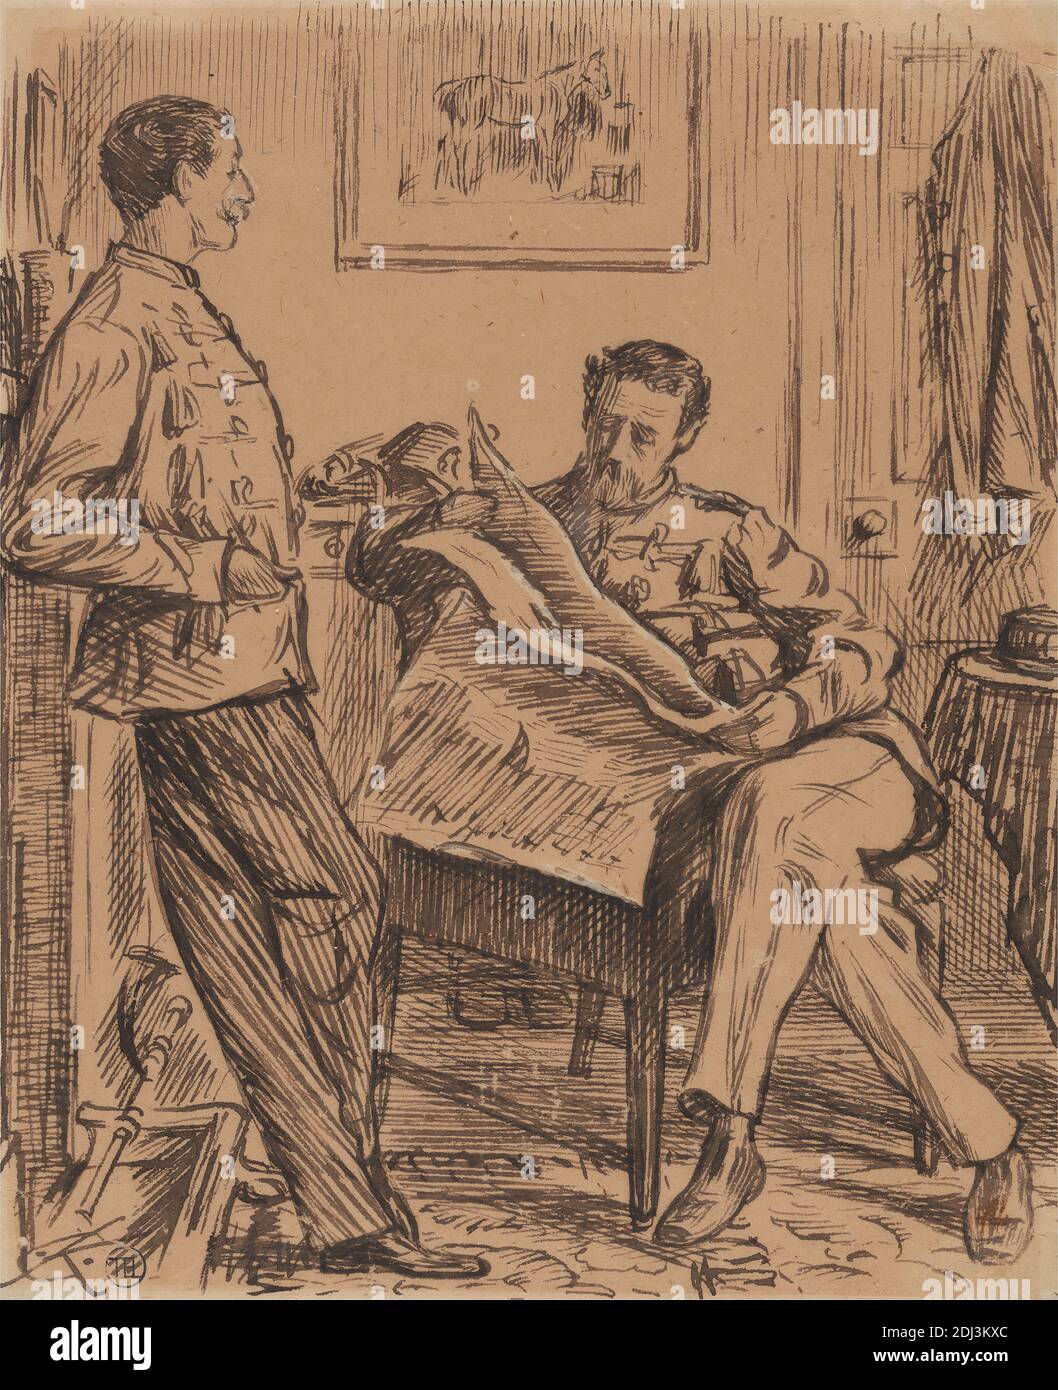 The Queen's English: An Iillustration in 'Punch', Aug. 11, 1877, Charles Samuel Keene, 1823–1891, British, ca. 1877, Pen in brown ink on medium, slightly textured, beige, wove paper, Sheet: 7 3/8 × 6 1/16 inches (18.7 × 15.4 cm), English languages and literatures, figure study, genre subject, illustration, interior, men, newspaper, reading Stock Photo